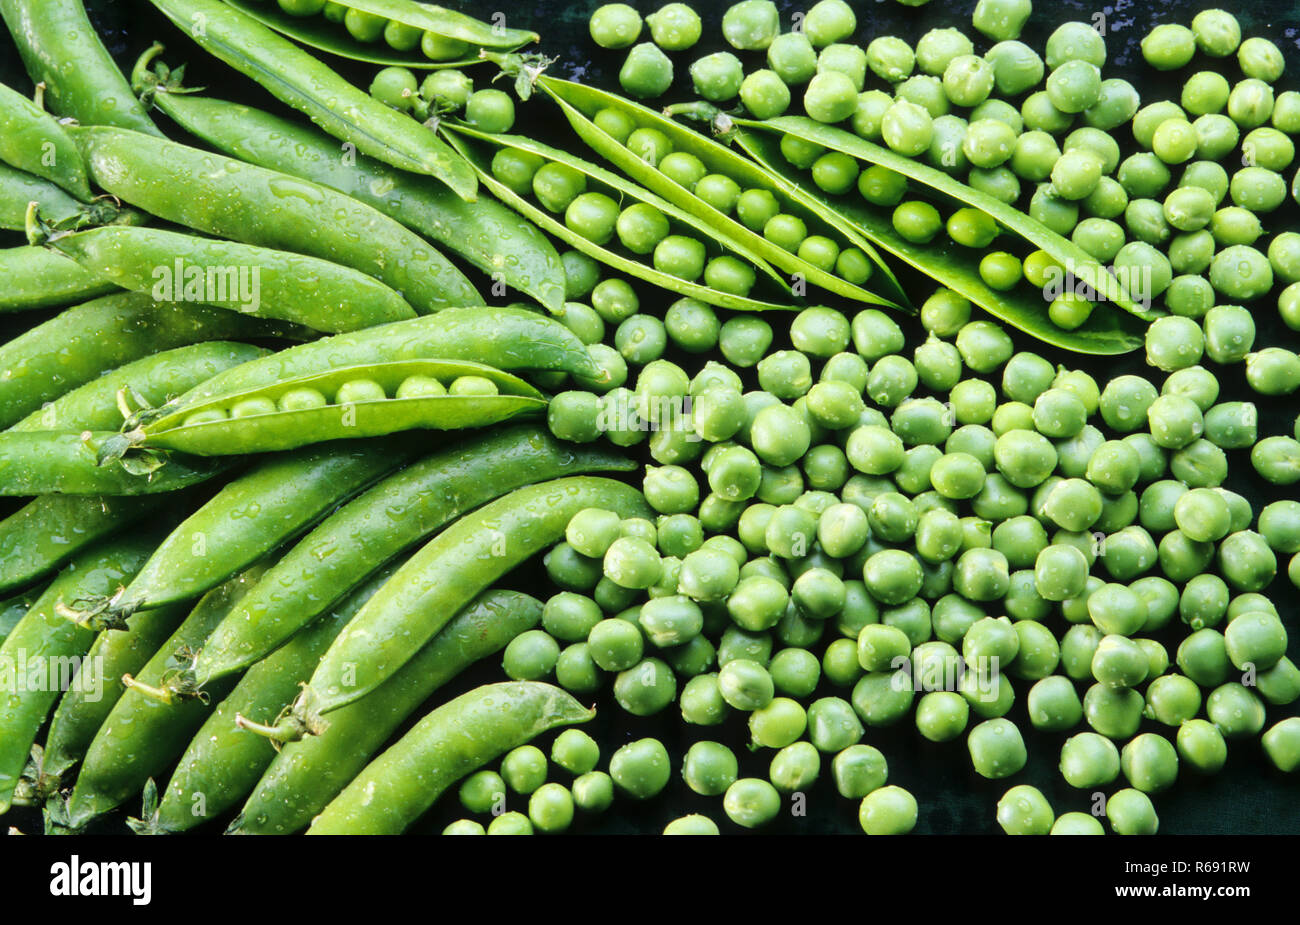 Green peas pods and seeds Stock Photo